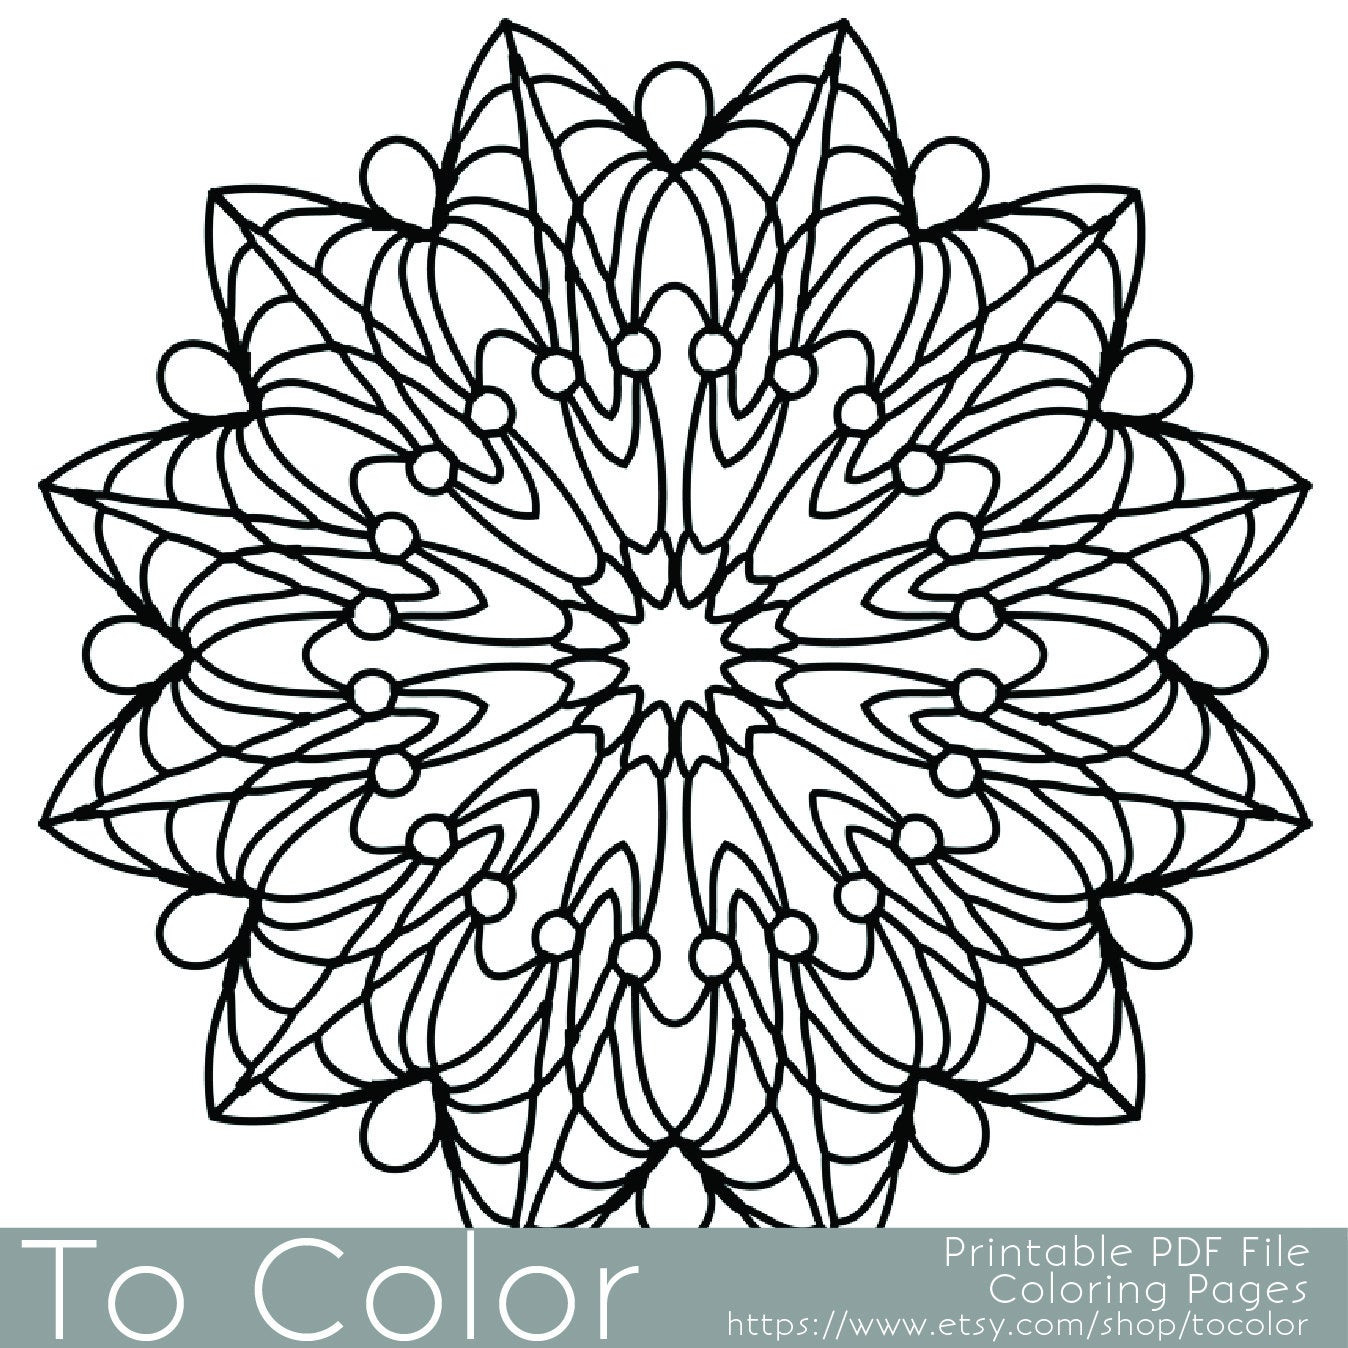 Free Adult Coloring Pages Printable
 Simple Printable Coloring Pages for Adults Gel Pens Mandala